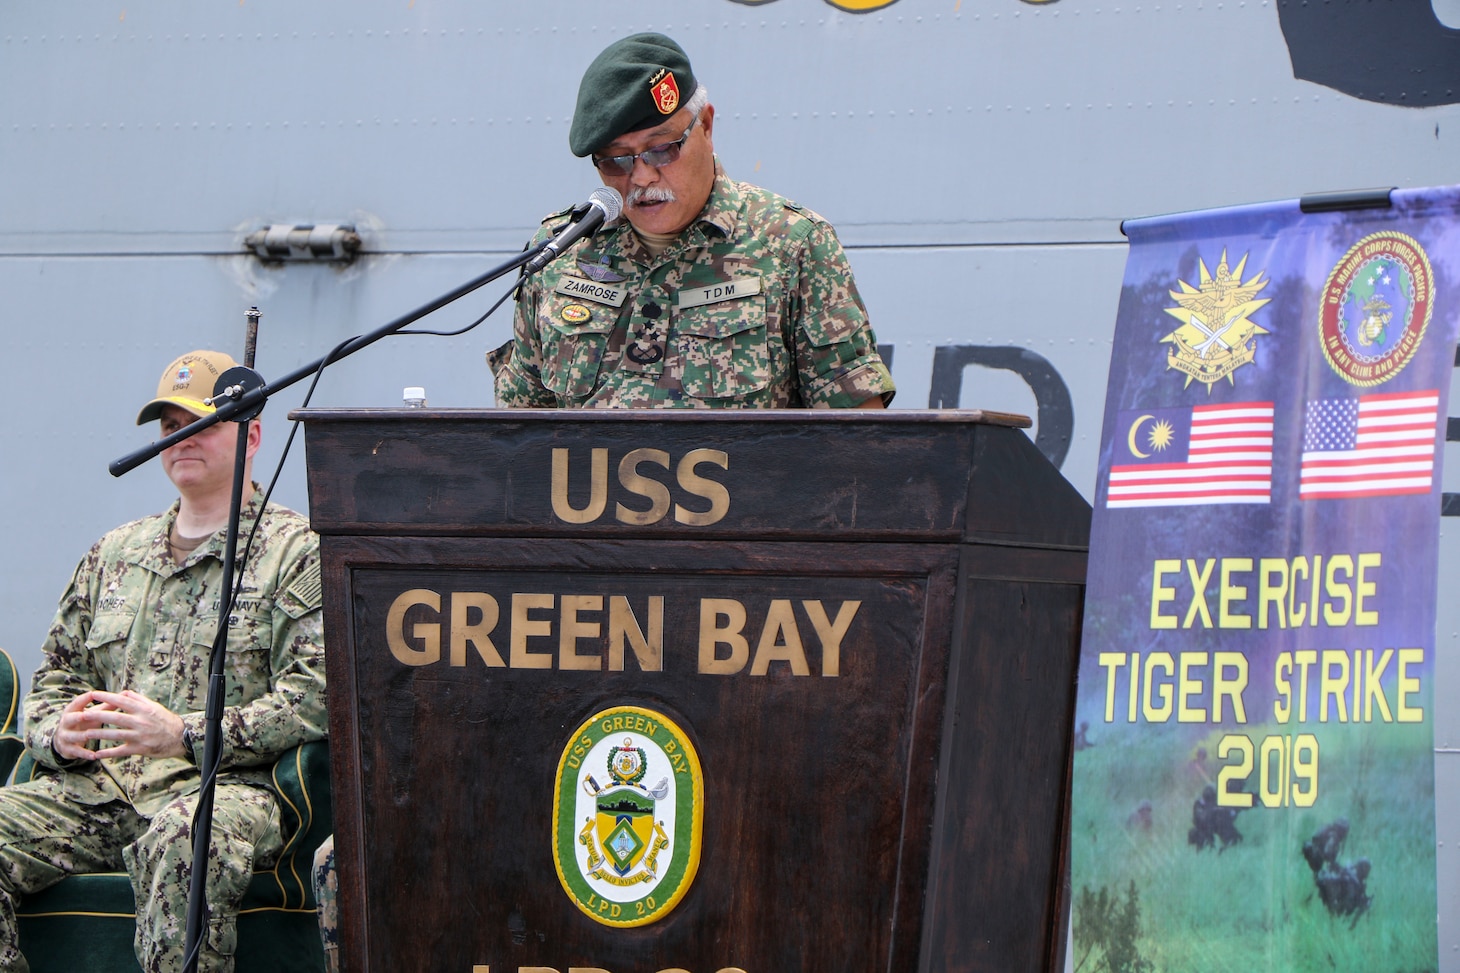 CELEBES SEA (Sept. 30, 2019) Malaysian Armed Forces (MAF) Lt. Gen. Dato’ Wira Zambrose bin Mohd Zain, Army Field Eastern Commander, addresses Malaysian and U.S. service members during an opening ceremony for exercise Tiger Strike 2019 aboard the amphibious transport dock ship USS Green Bay (LPD 20). Tiger Strike focuses on strengthening combined U.S. and Malaysian military interoperability and increasing combat readiness through amphibious operations and cultural exchanges between the MAF and the U.S. Navy, Marine Corps team.